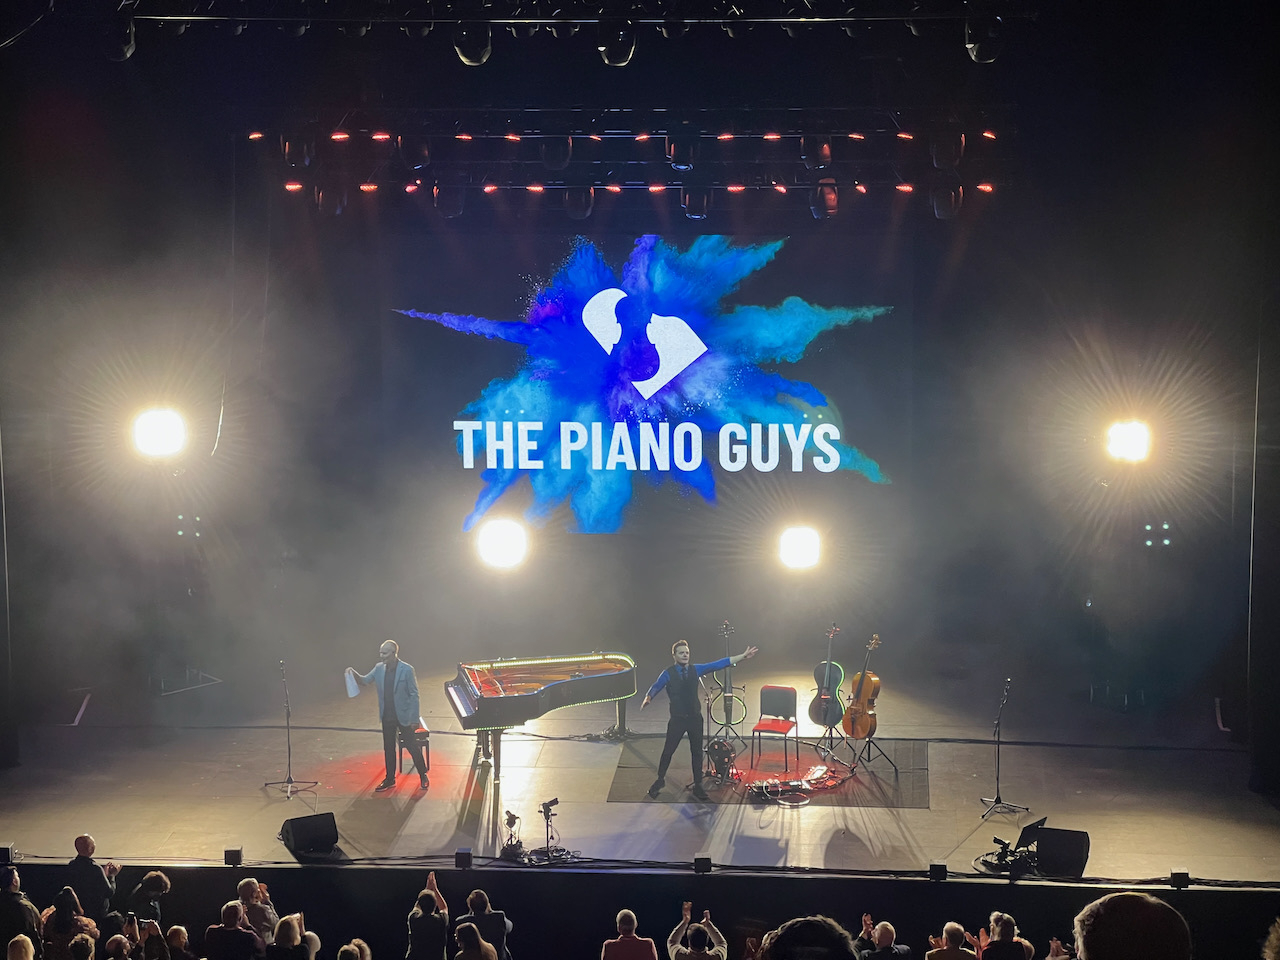 Two musicians on stage with instruments, presenting under a large sign that reads 'THE PIANO GUYS,' with a vibrant blue splash graphic, audience clapping, bright stage lights.